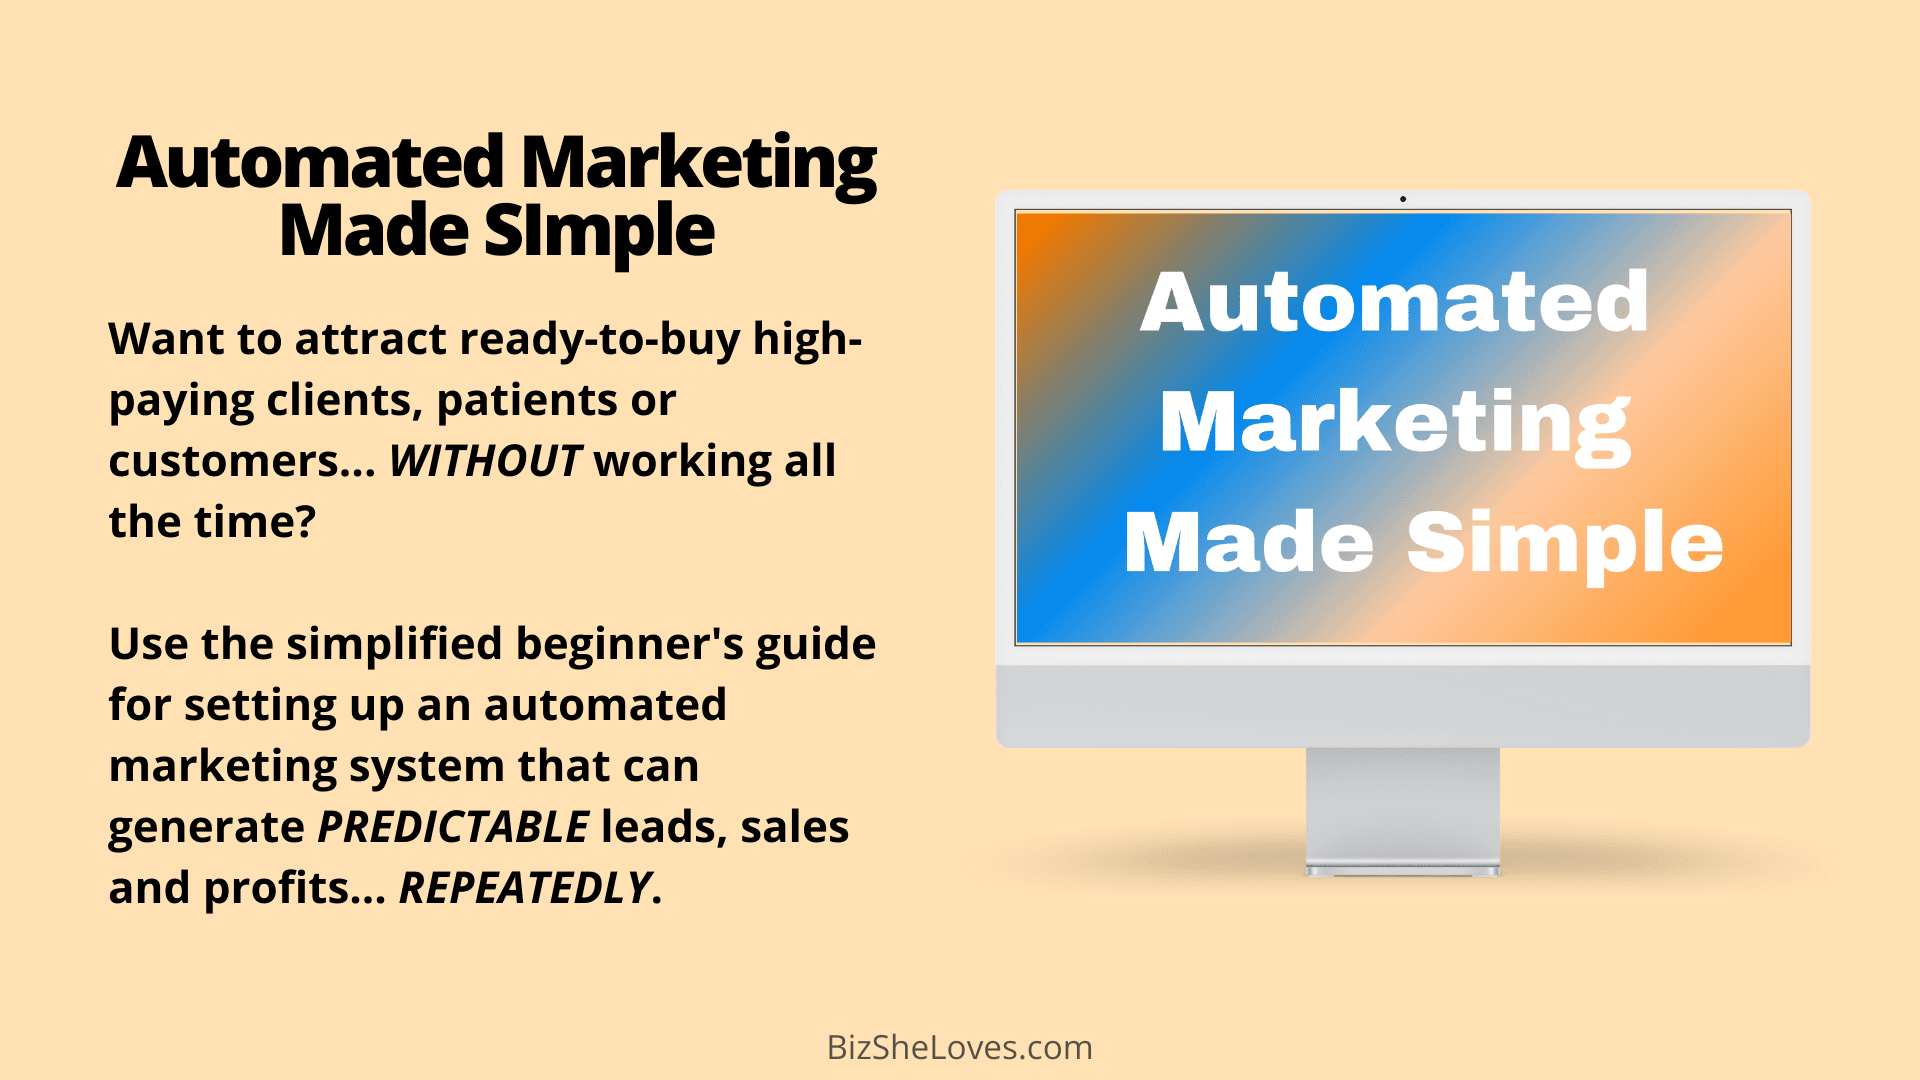 Automated Marketing Made Simple